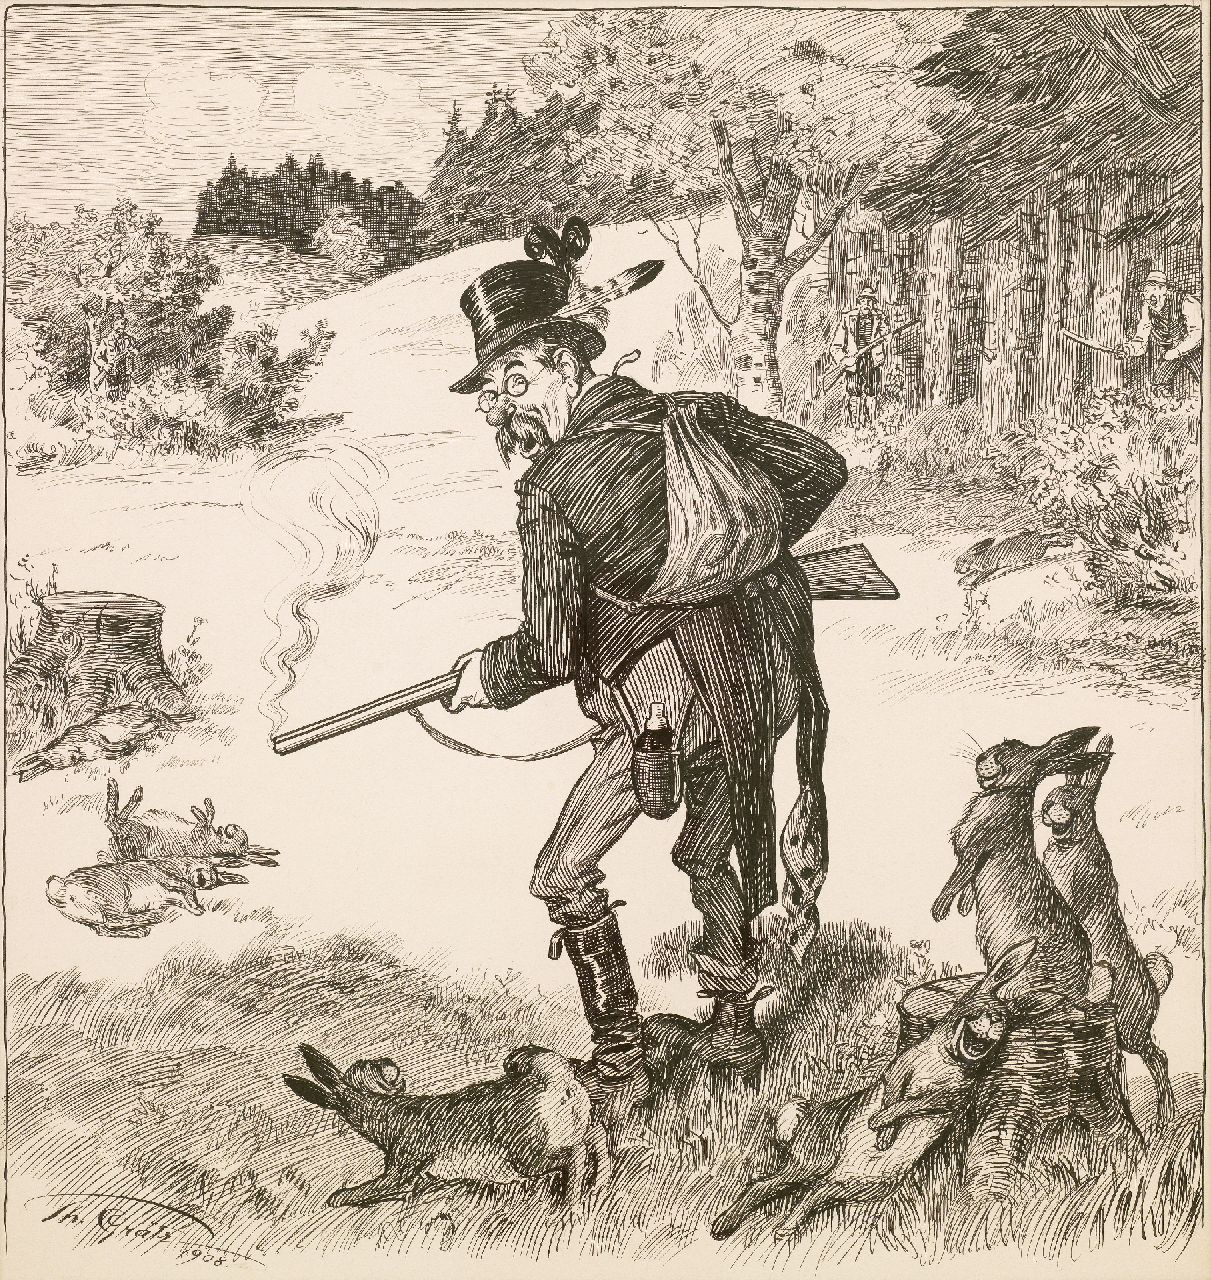 Graetz Th.  | Theodor Graetz, The sharp rifleman, pen and ink on paper 40.0 x 42.0 cm, signed l.l. and dated 1908